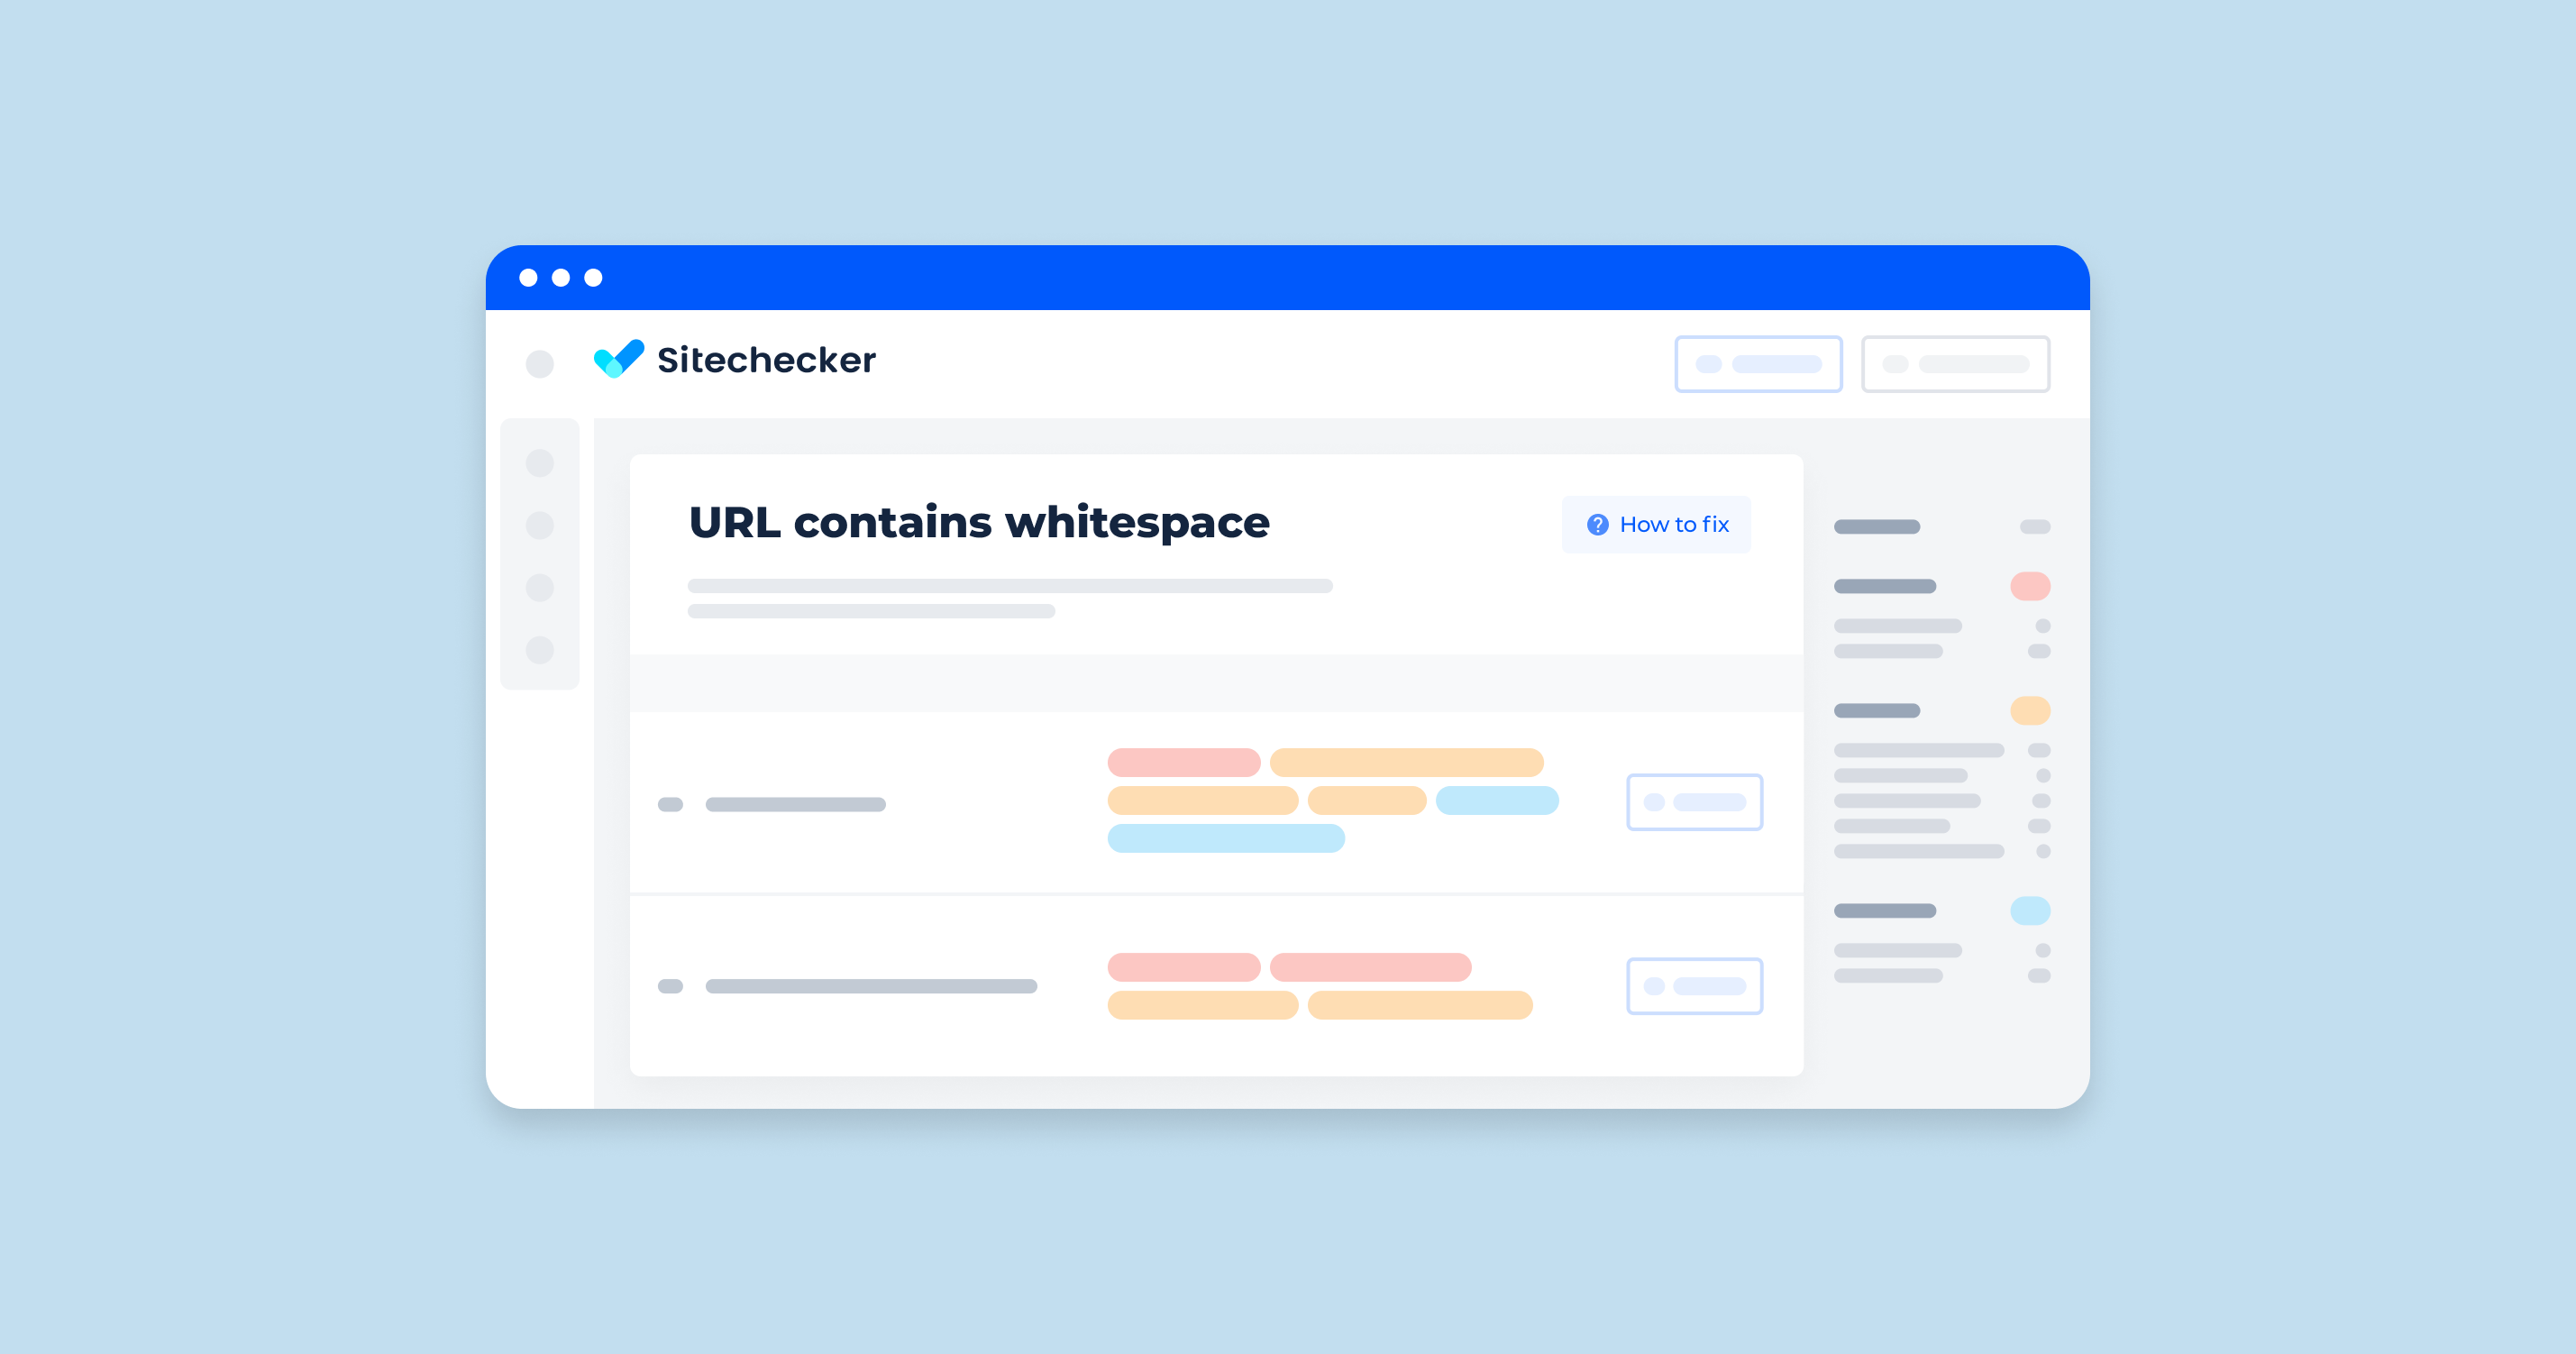 https://sitechecker.pro/wp-content/uploads/2021/10/URL-contains-whitespace.png